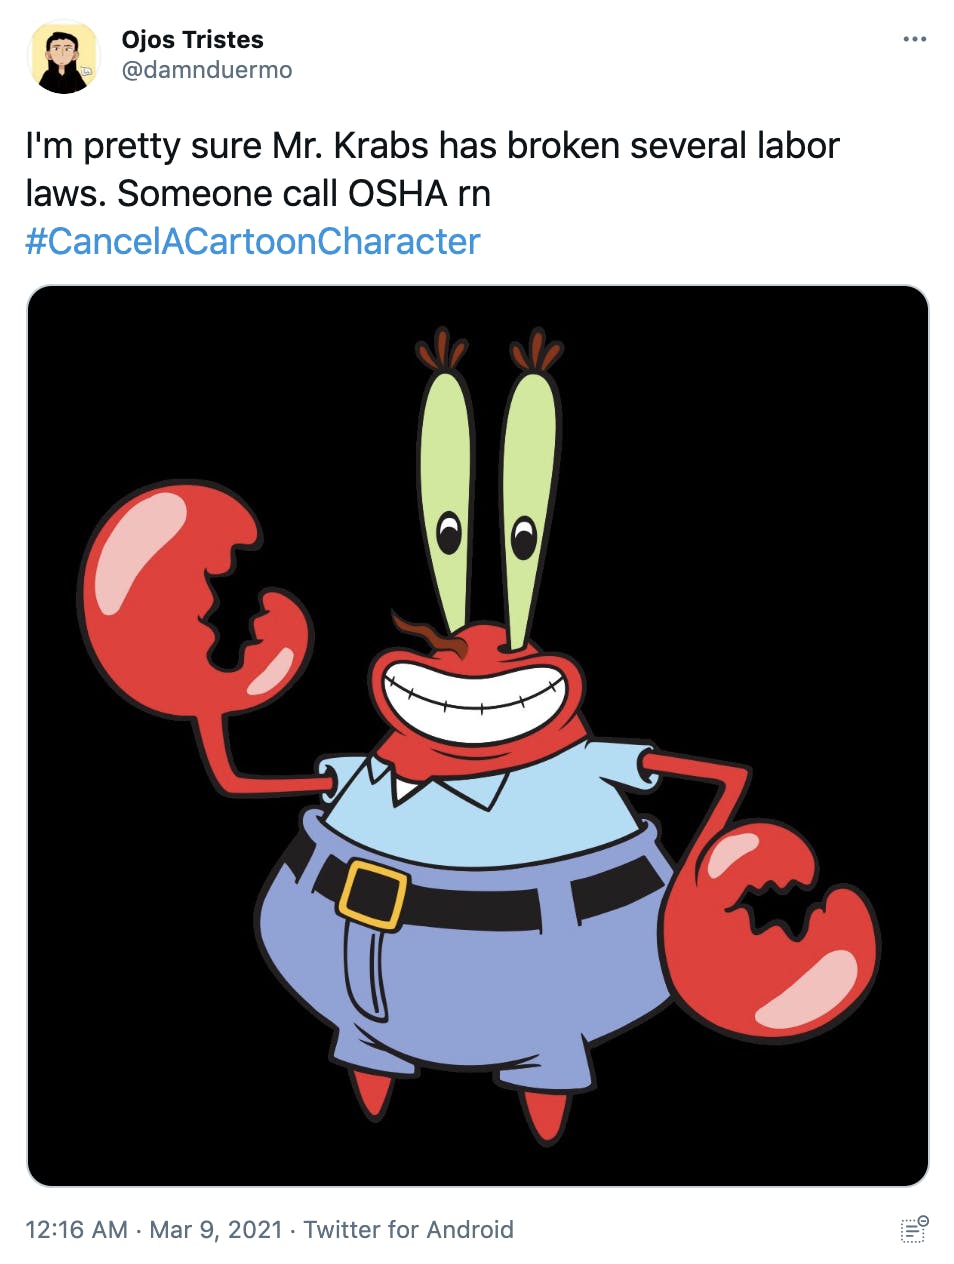 'I'm pretty sure Mr. Krabs has broken several labor laws. Someone call OSHA rn #CancelACartoonCharacter' picture of Mr. Krabs, a red crab wearing a blue polo shirt and jeans